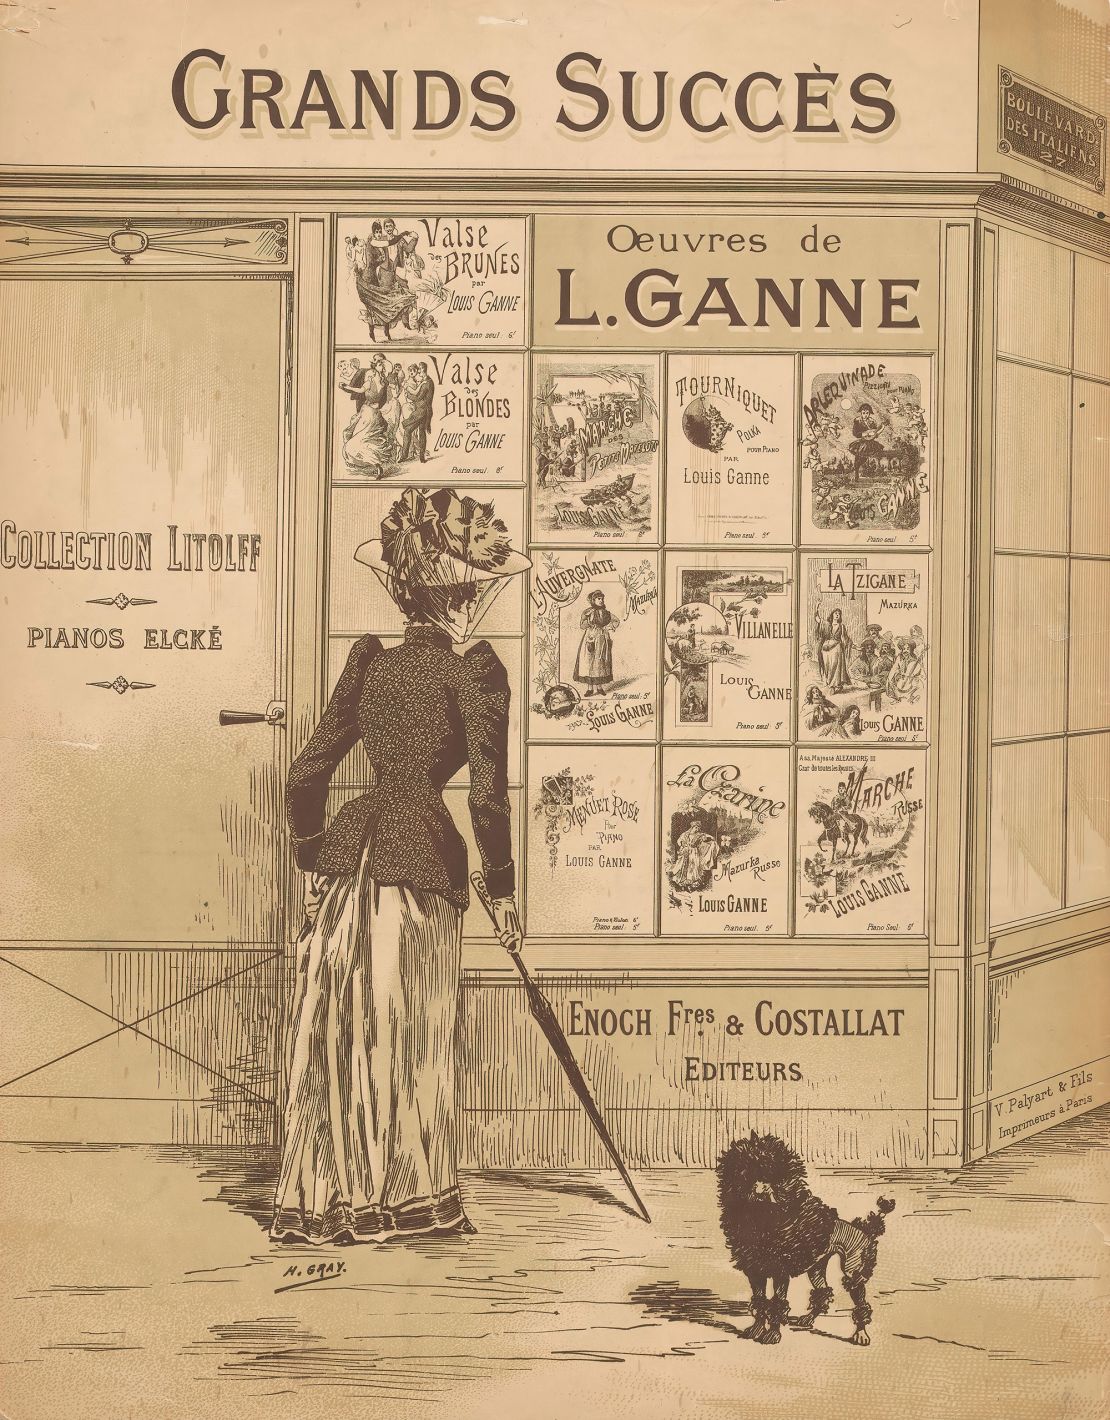 This illustration, dated from circa 1880 - 1895, shows a woman standing in front of the window of Enoch Frères & Costallat publishers in Paris, with in the foreground, a poodle.